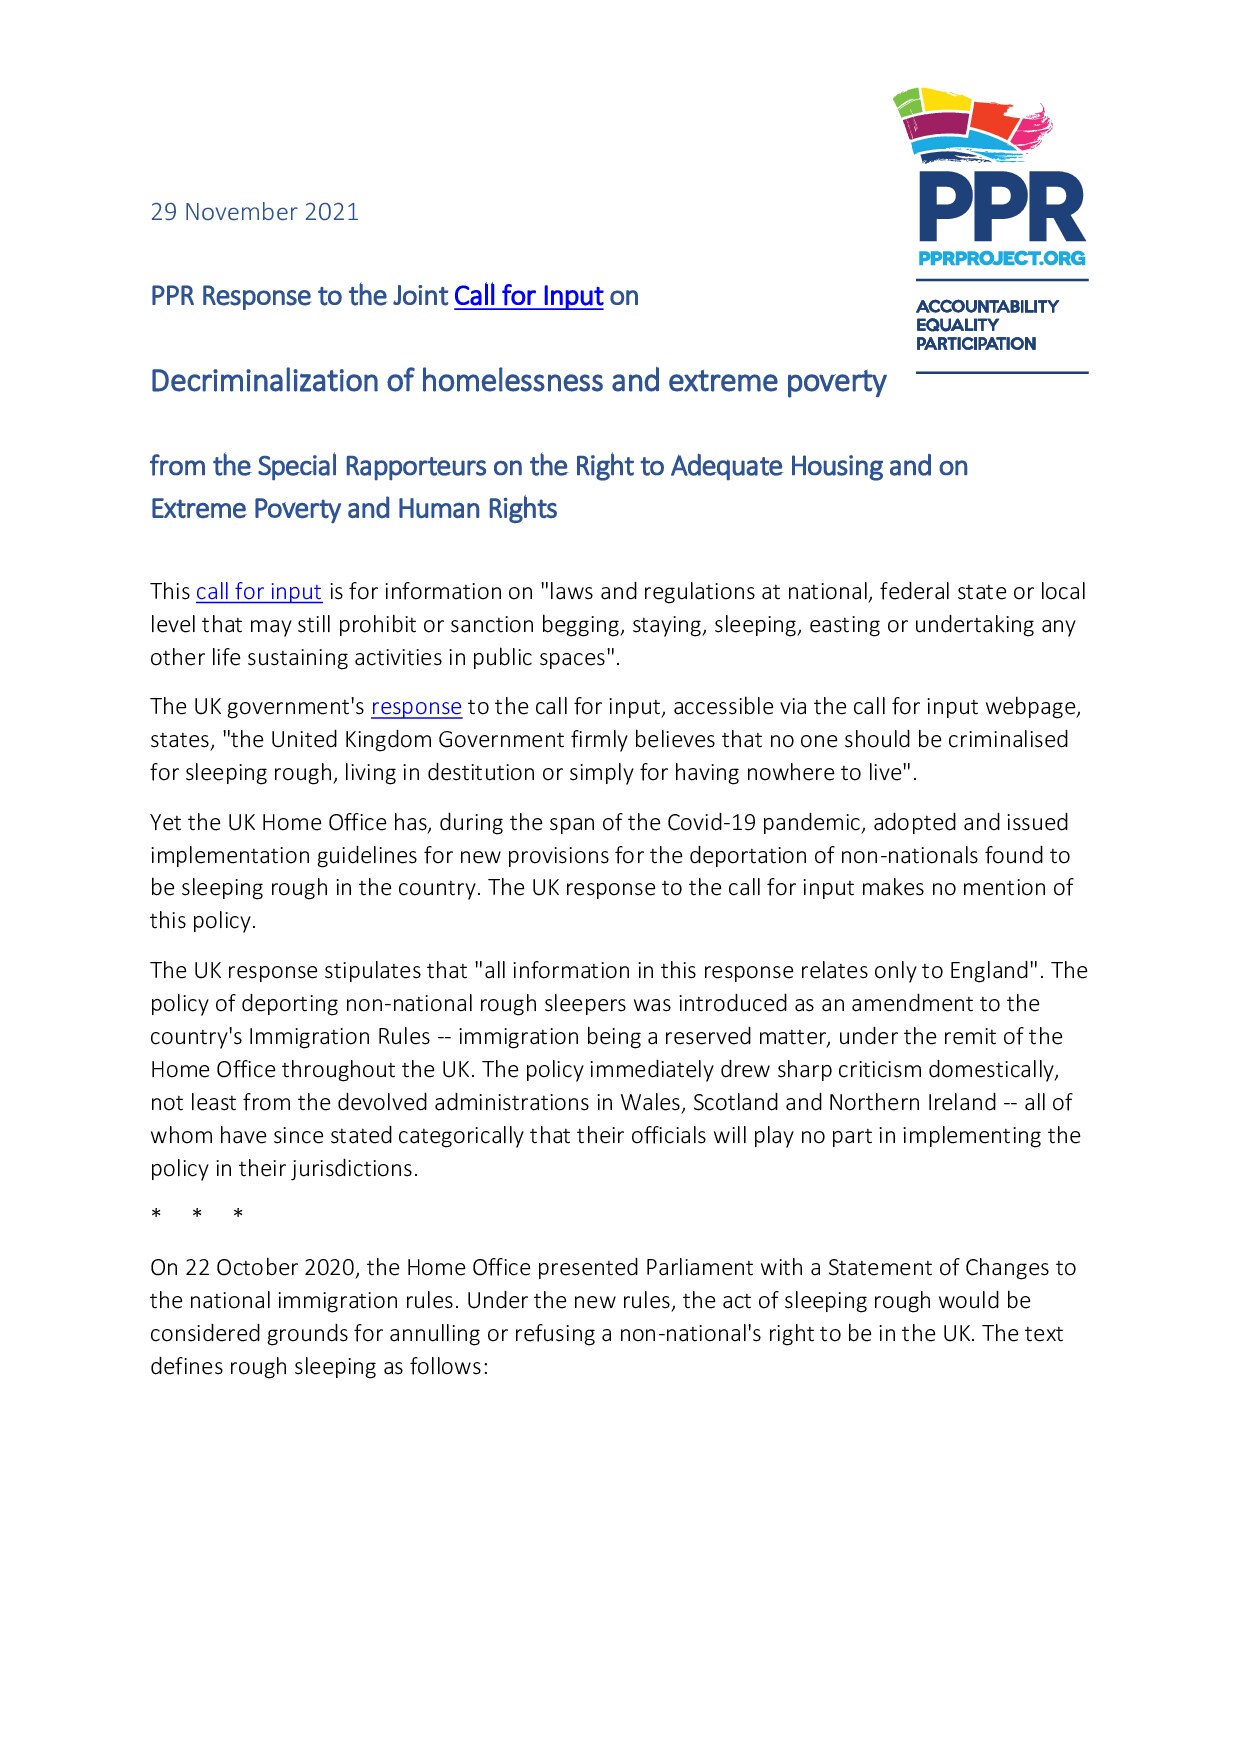 PPR Response to the Joint Call for input on decriminalization of homelessness and extreme poverty